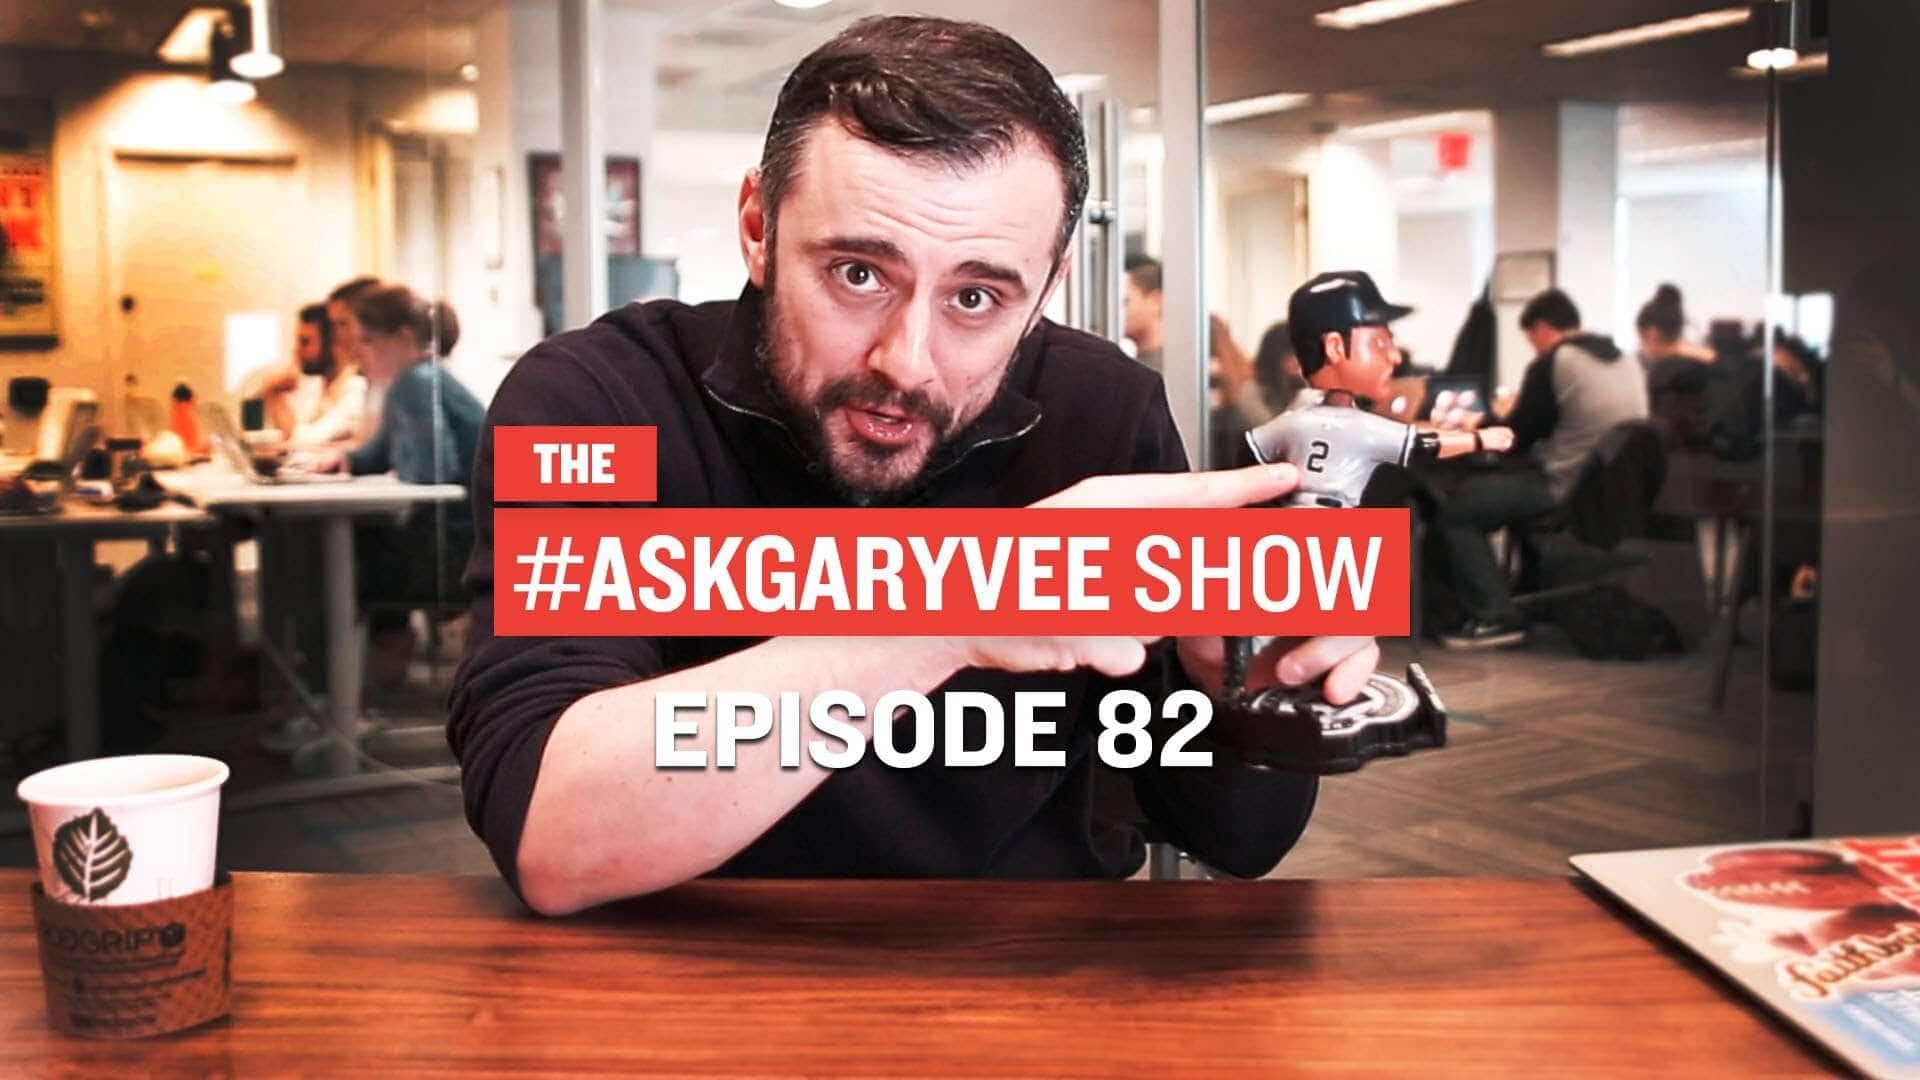 #AskGaryVee Episode 82: Buying Followers, Dealing with Rejection & Millennials